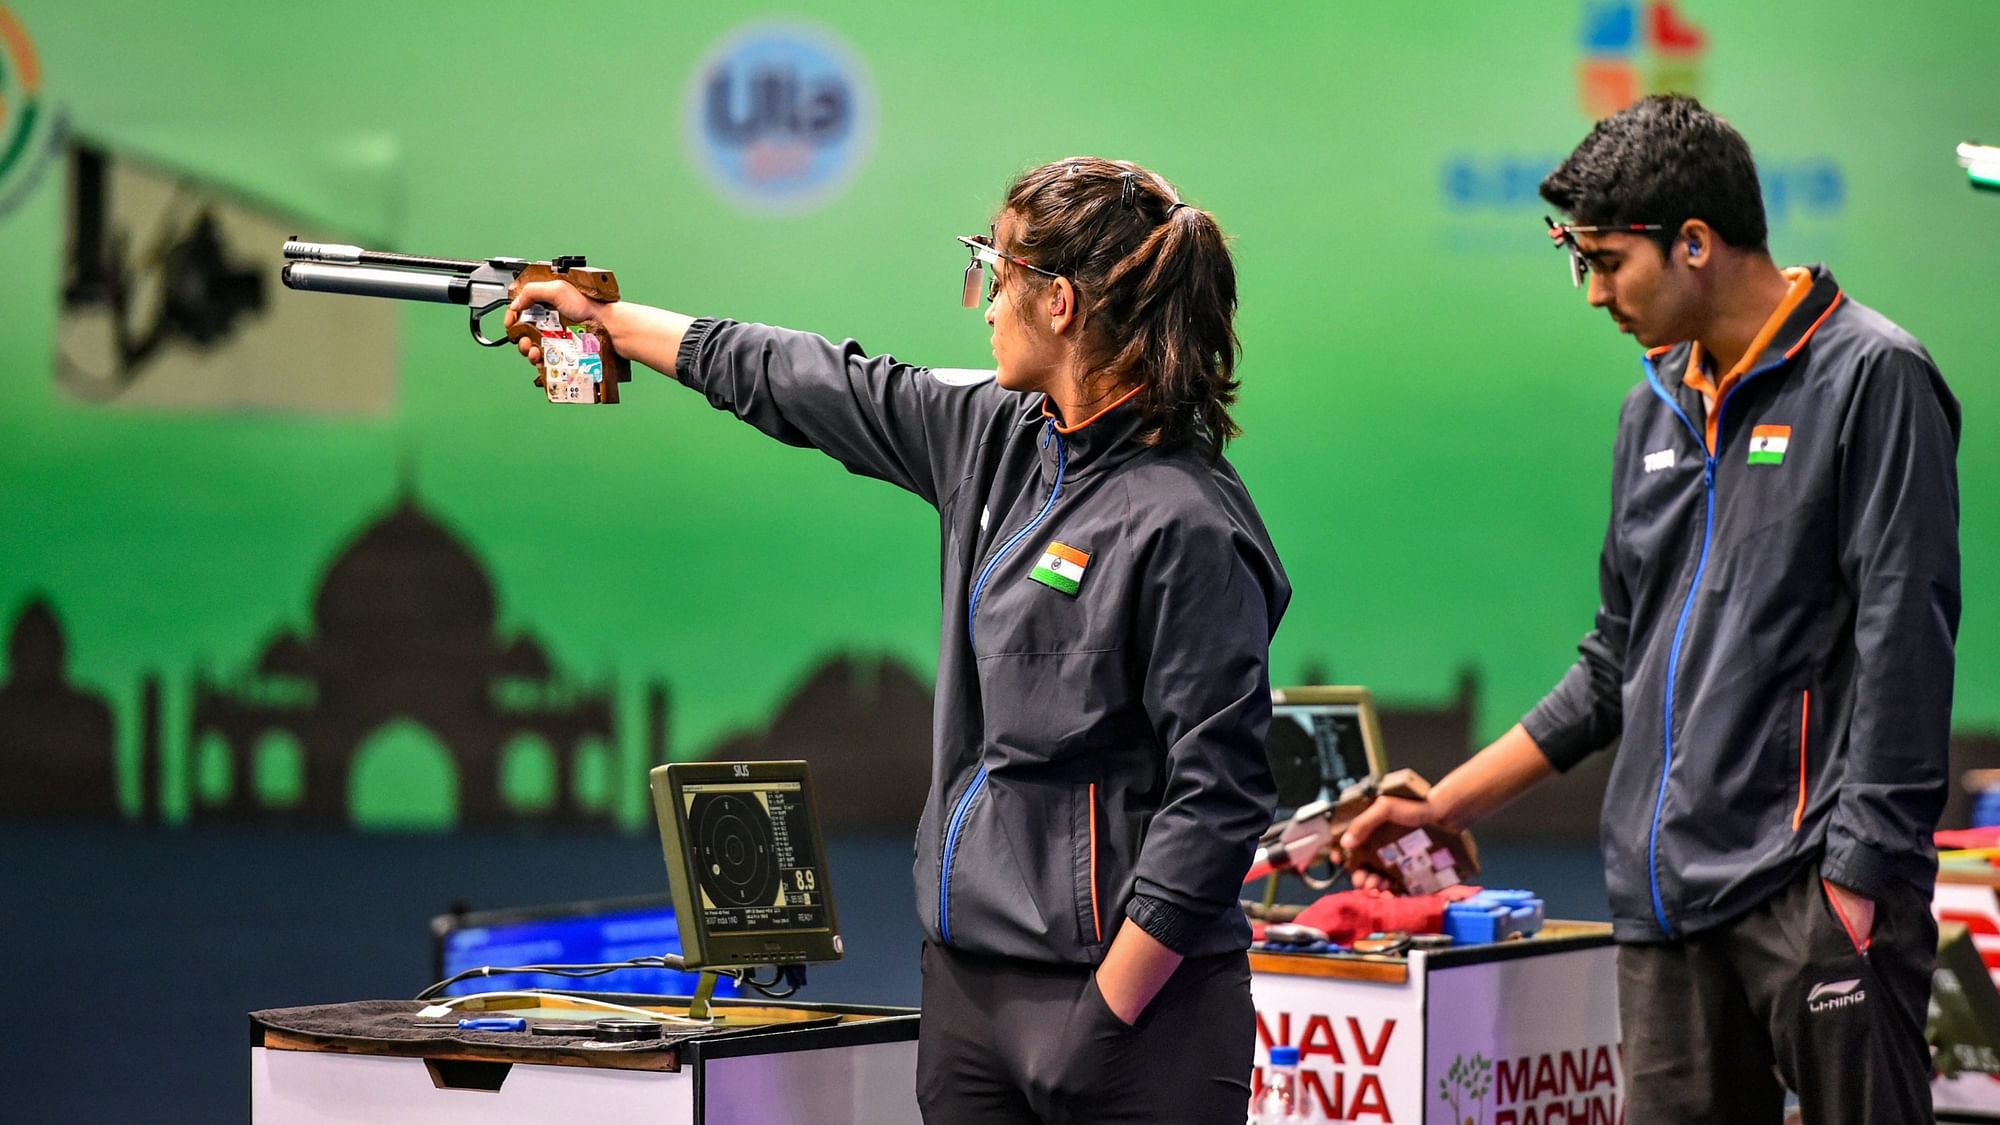 Manu Bhaker and Saurabh Chaudhary during their 10m Air Pistol Mixed Team of the ISSF World Cup in Delhi.